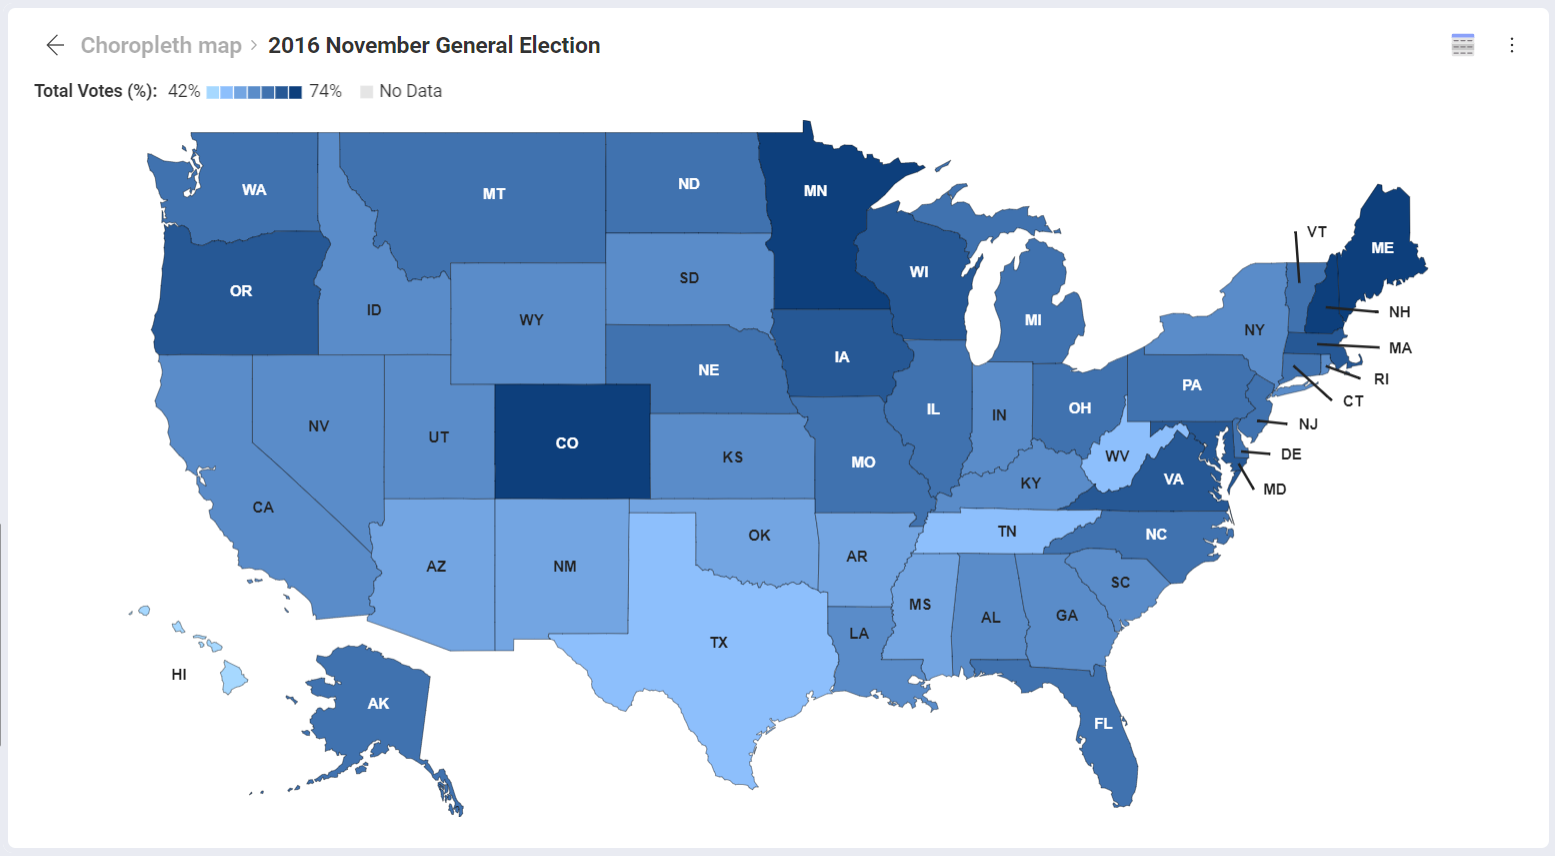 A choropleth map showing 2016 general elections in the US